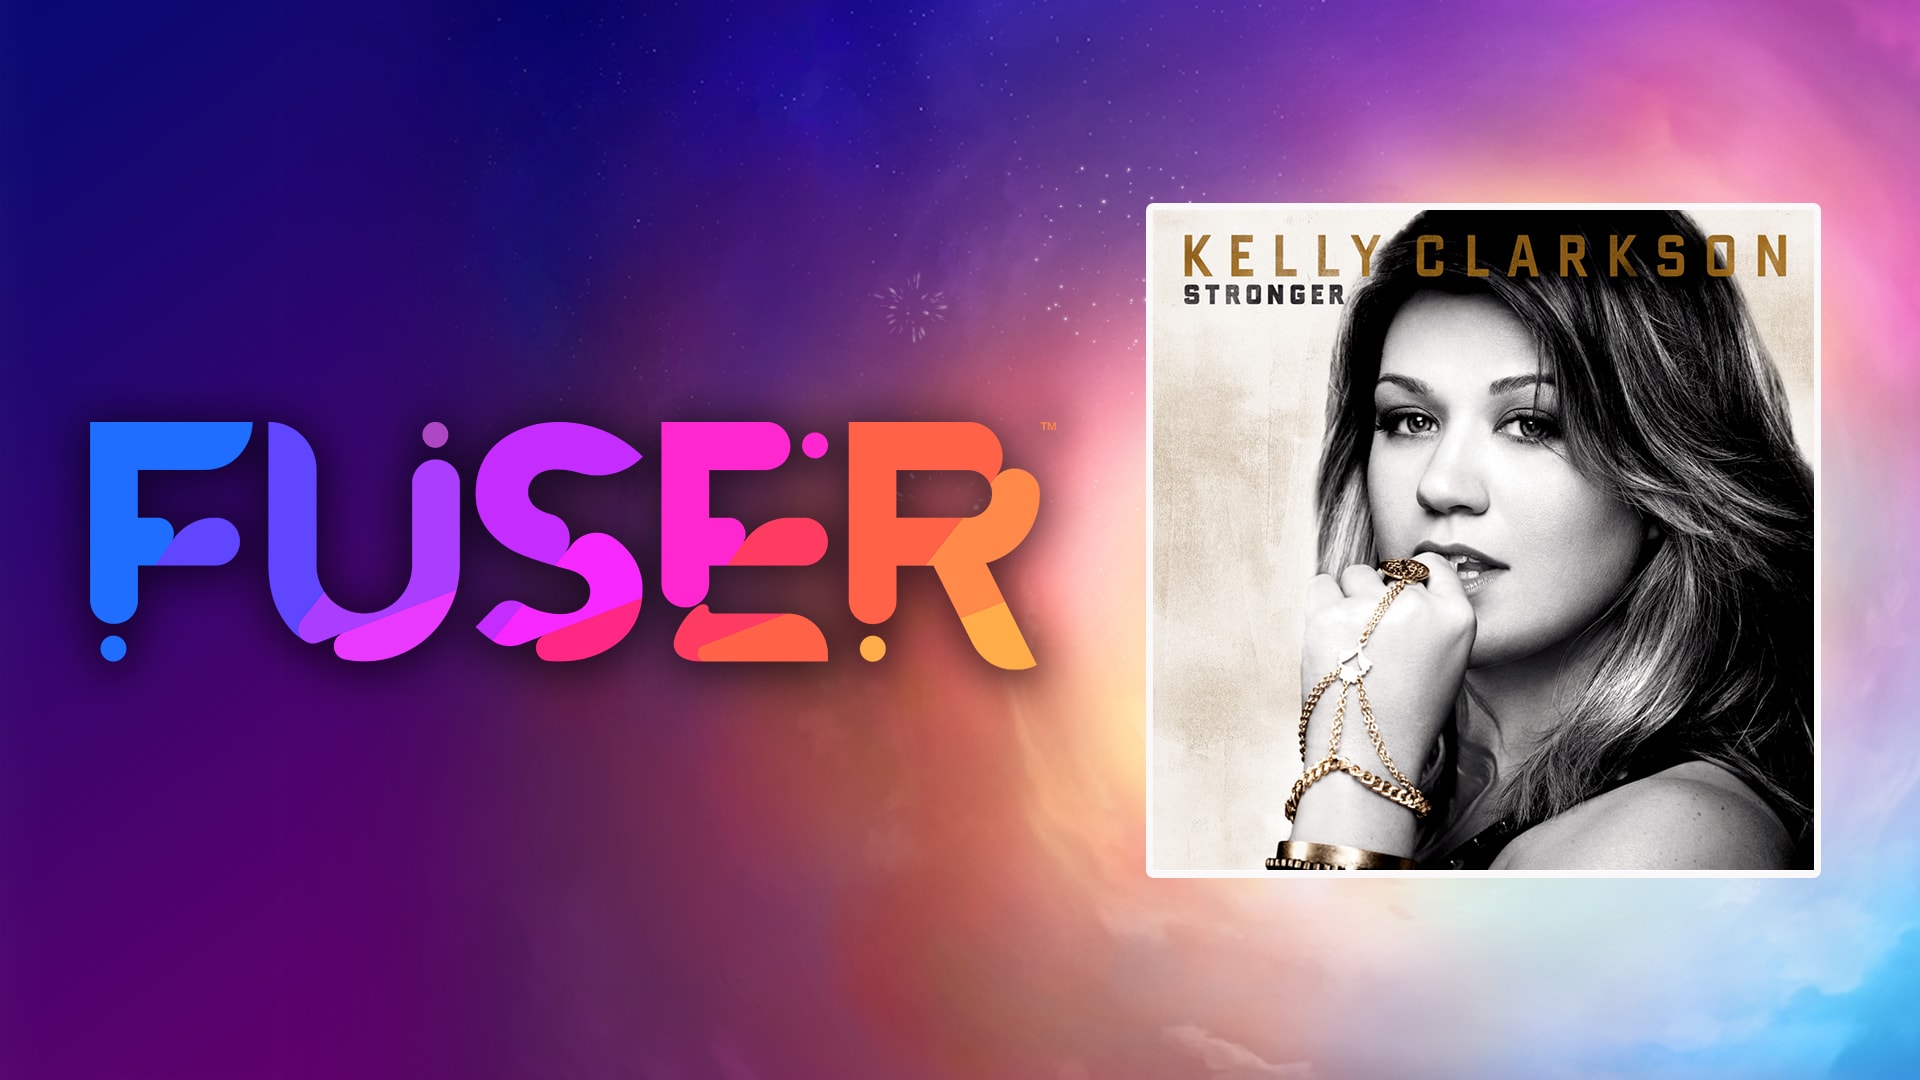 Kelly Clarkson - "Stronger (What Doesn't Kill You)"